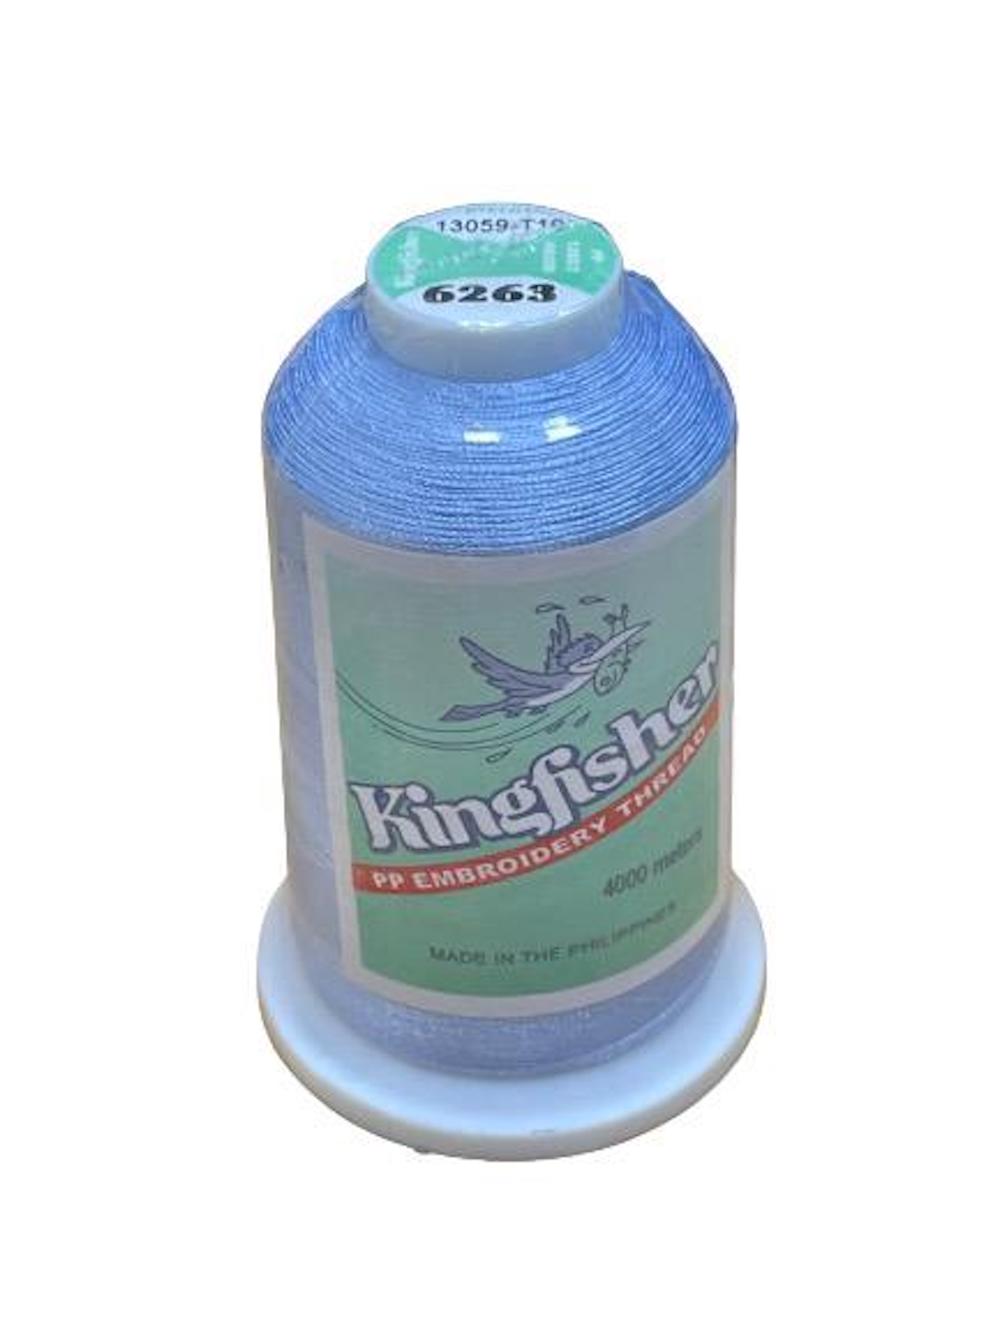 King Fisher Embroidery Thread 4000m 6263 - MY SEWING MALL